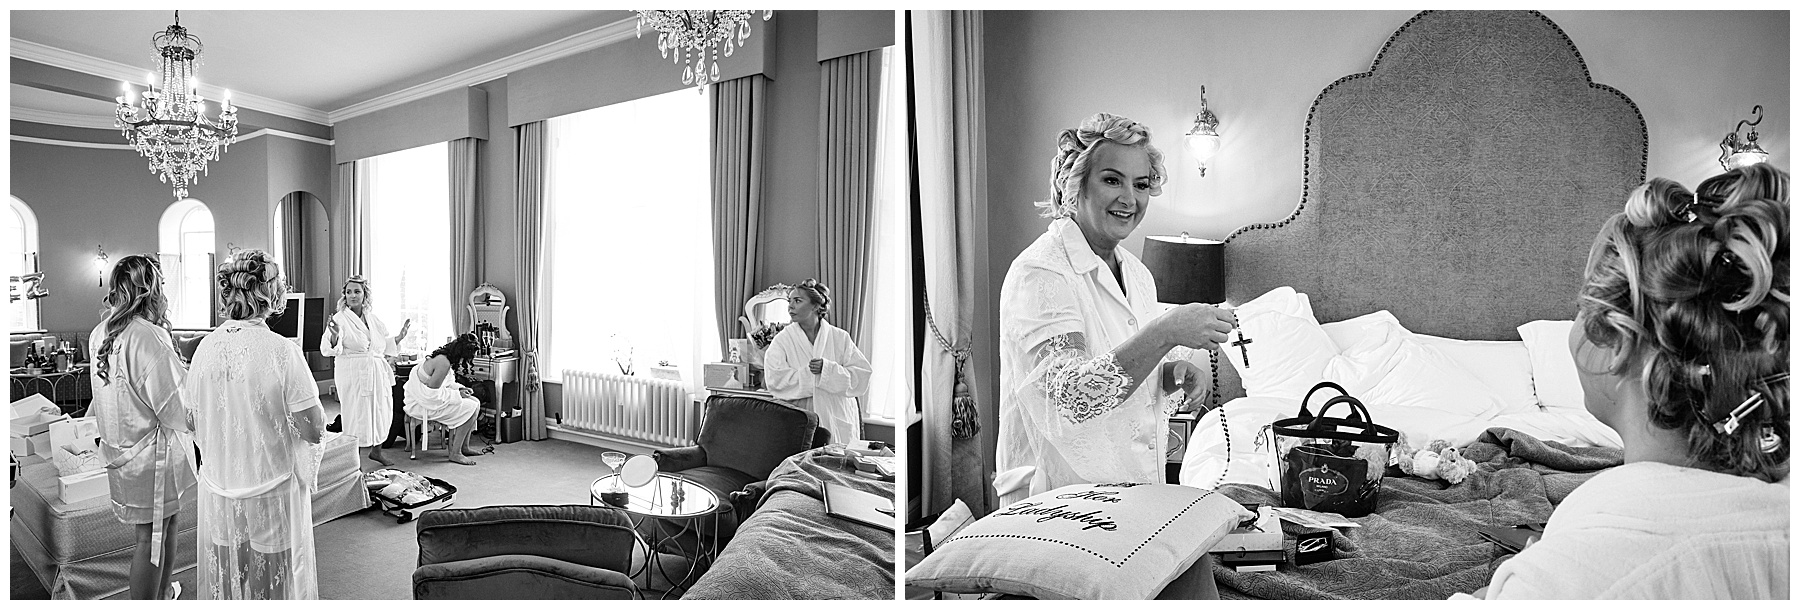 Creative documentary wedding photography capturing the wedding morning preparations for the bride and bridal party at Hawkstone Hall